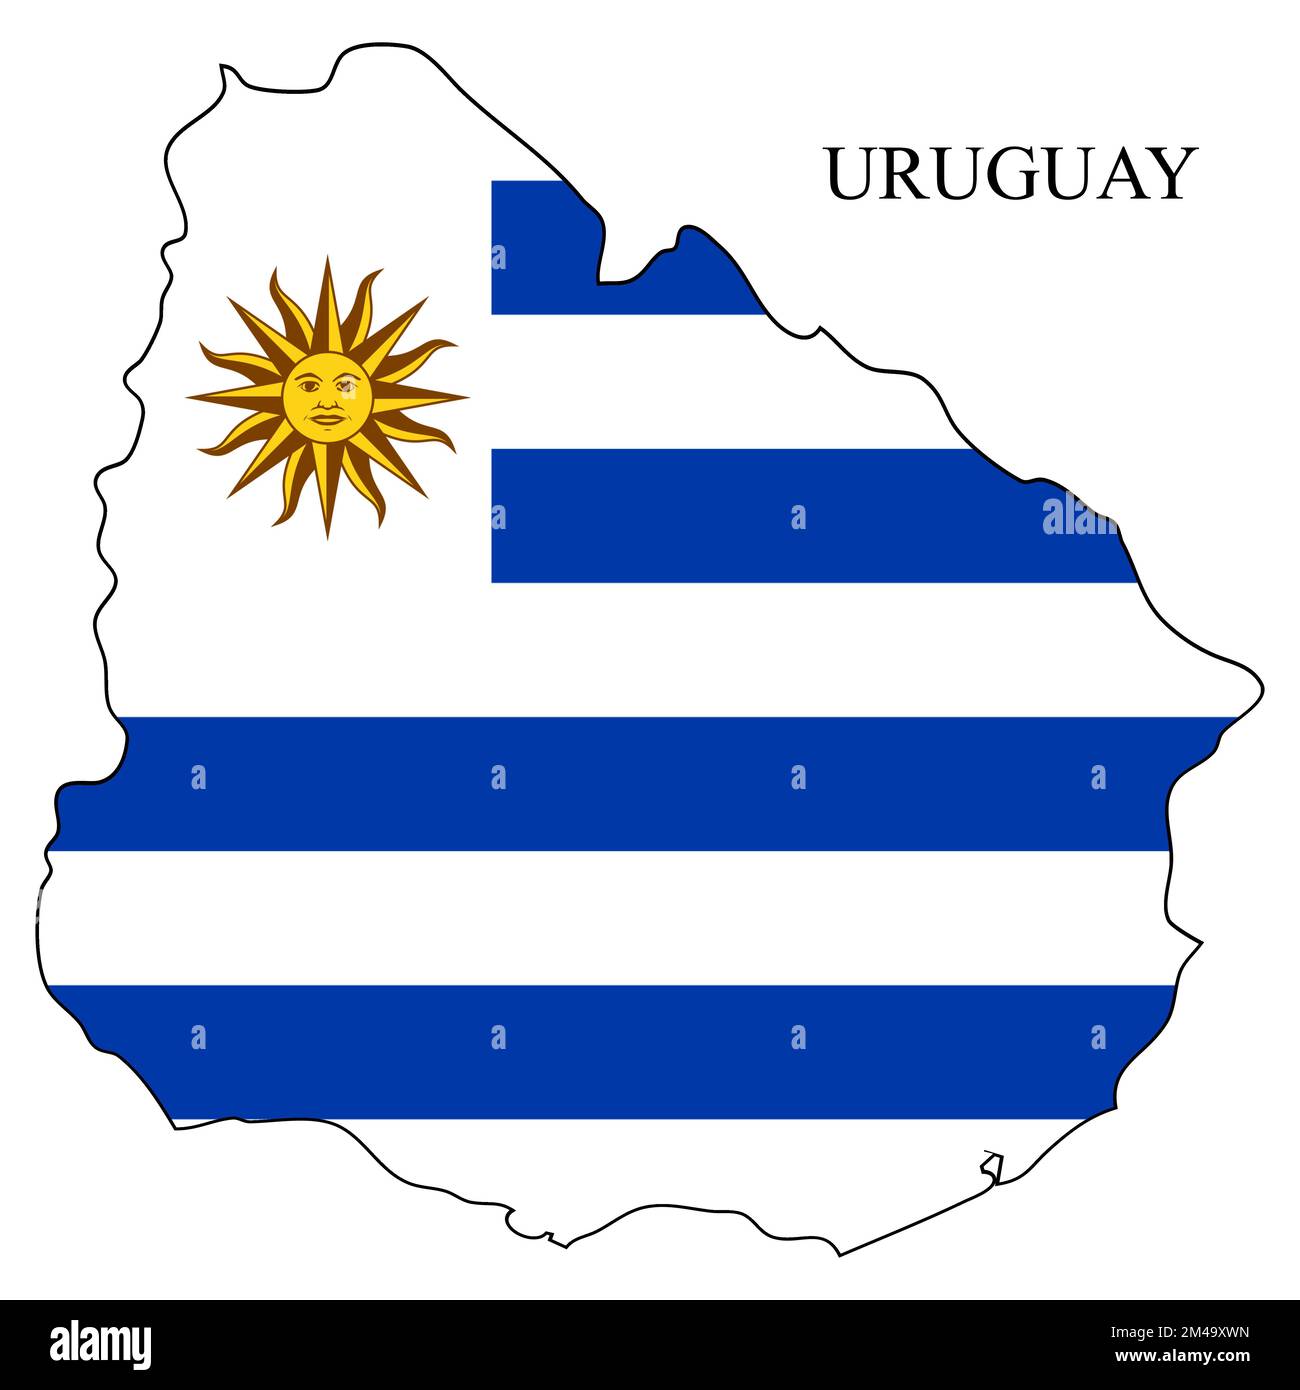 Uruguay map vector illustration. Global economy. Famous country. South America. Latin America. America. Stock Vector